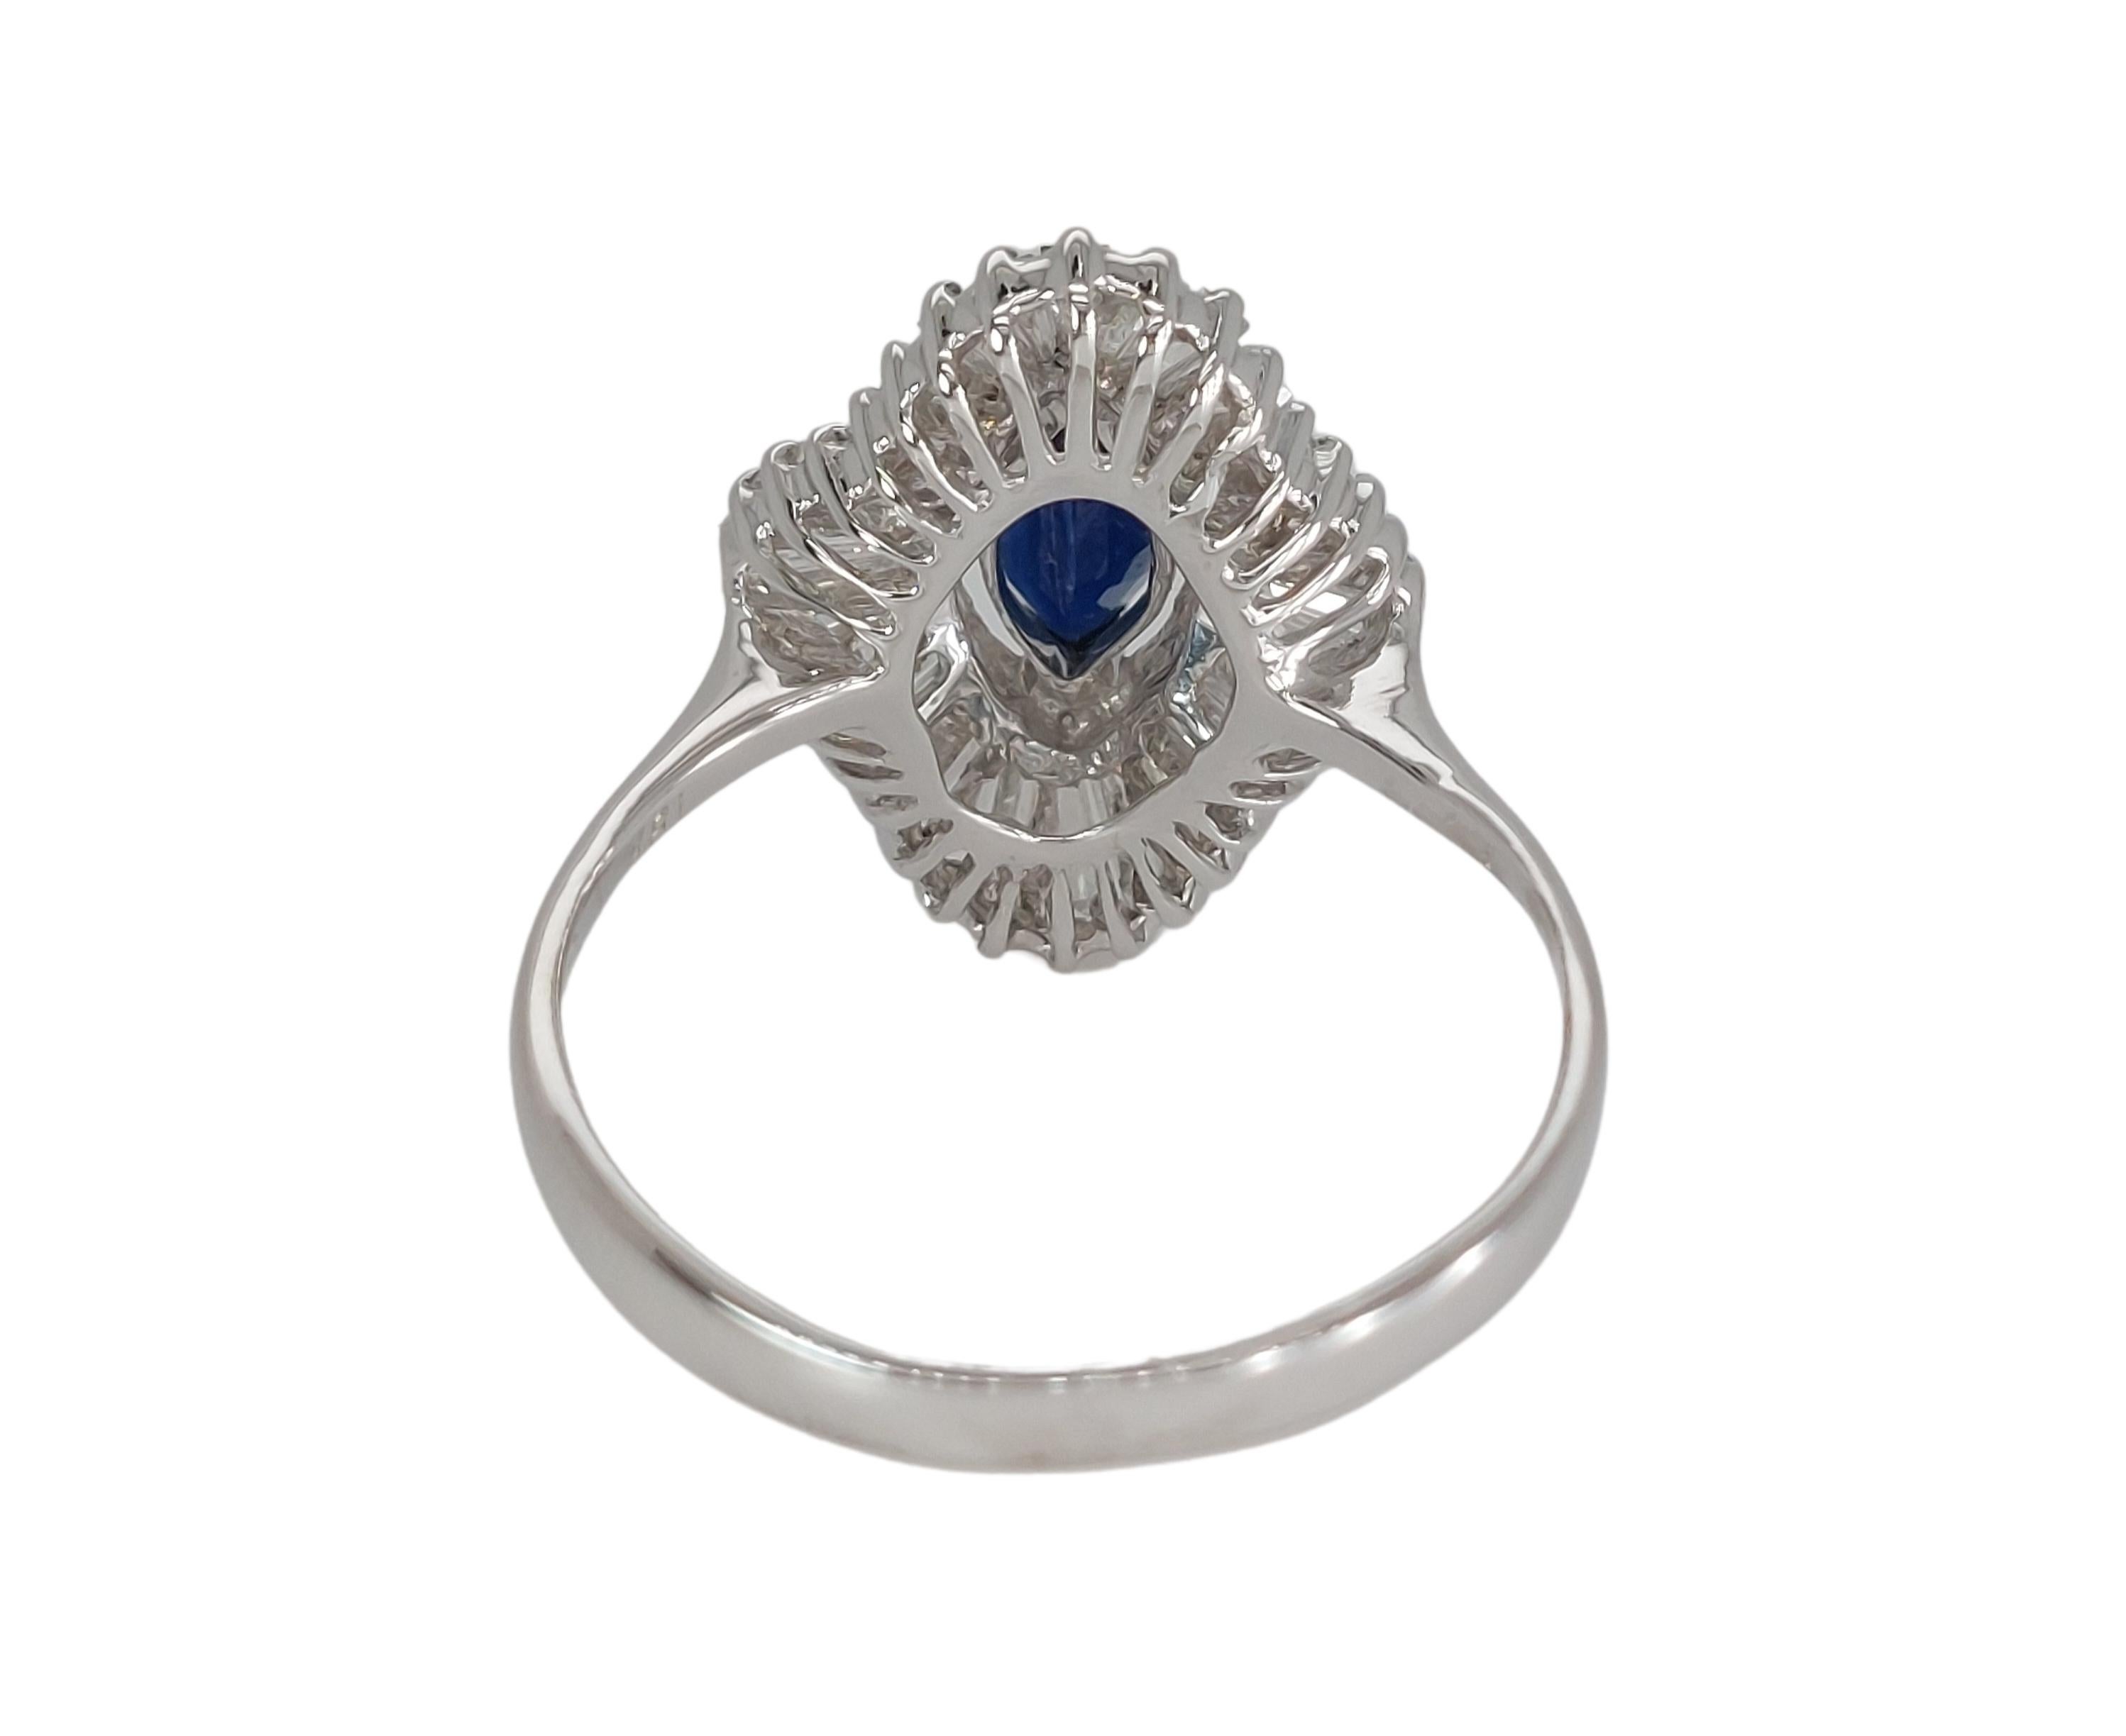 18kt White Gold Ring with 1.02ct Marquise Cut Sapphire and 2.4ct Diamonds For Sale 4